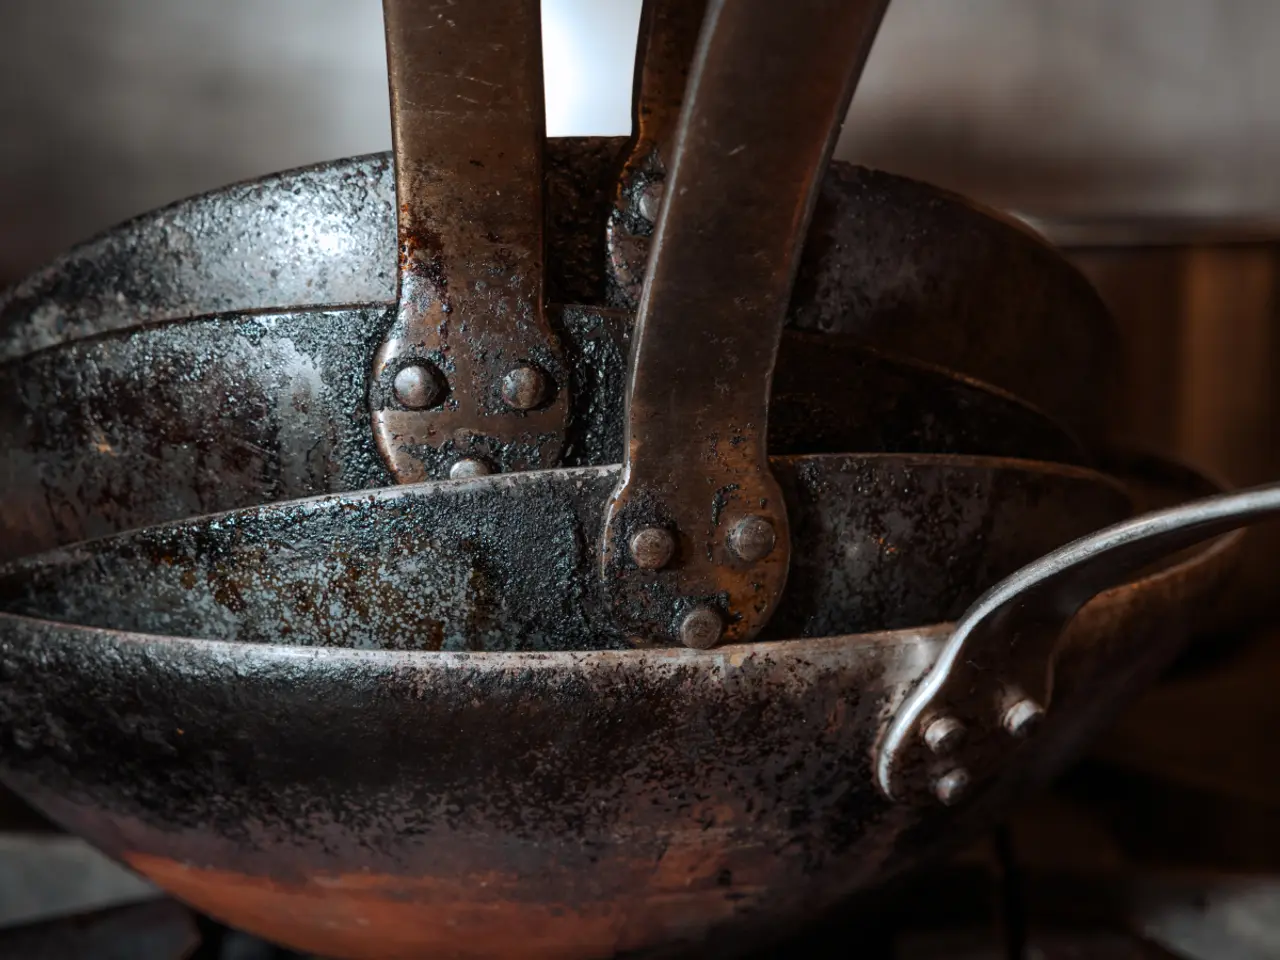 Stacked weathered cast iron skillets showing their handles and rivets.